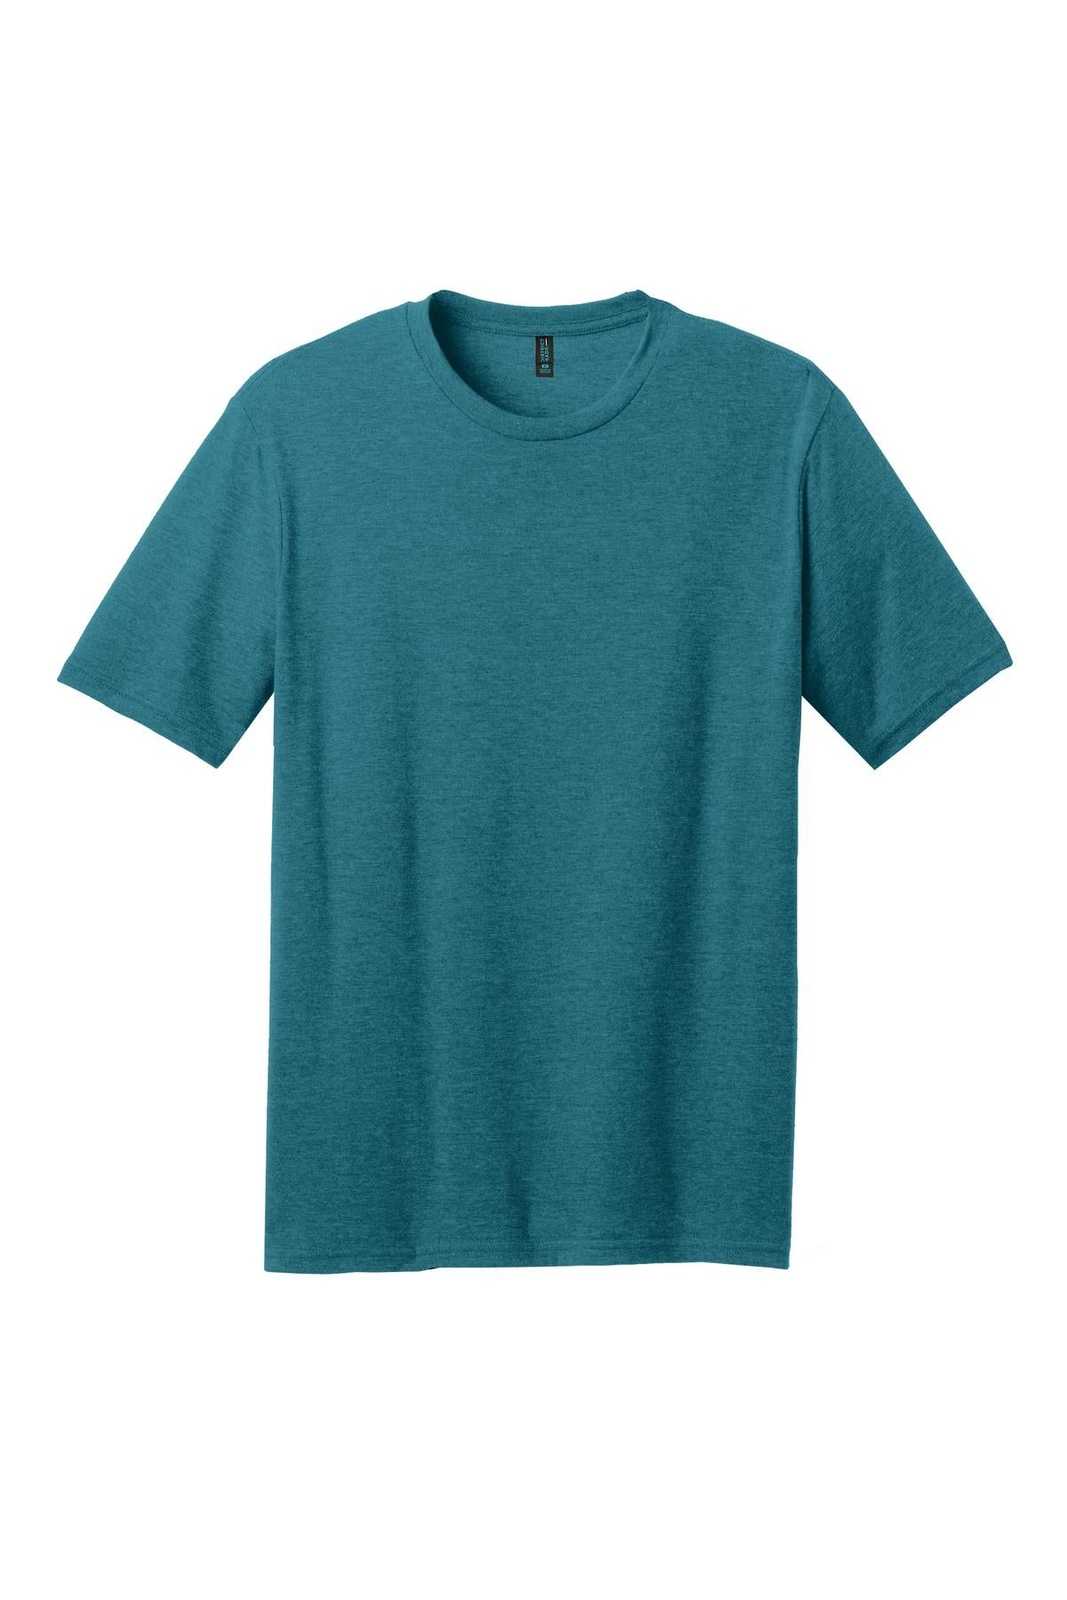 District DM108 Perfect Blend Tee - Heathered Teal - HIT a Double - 5